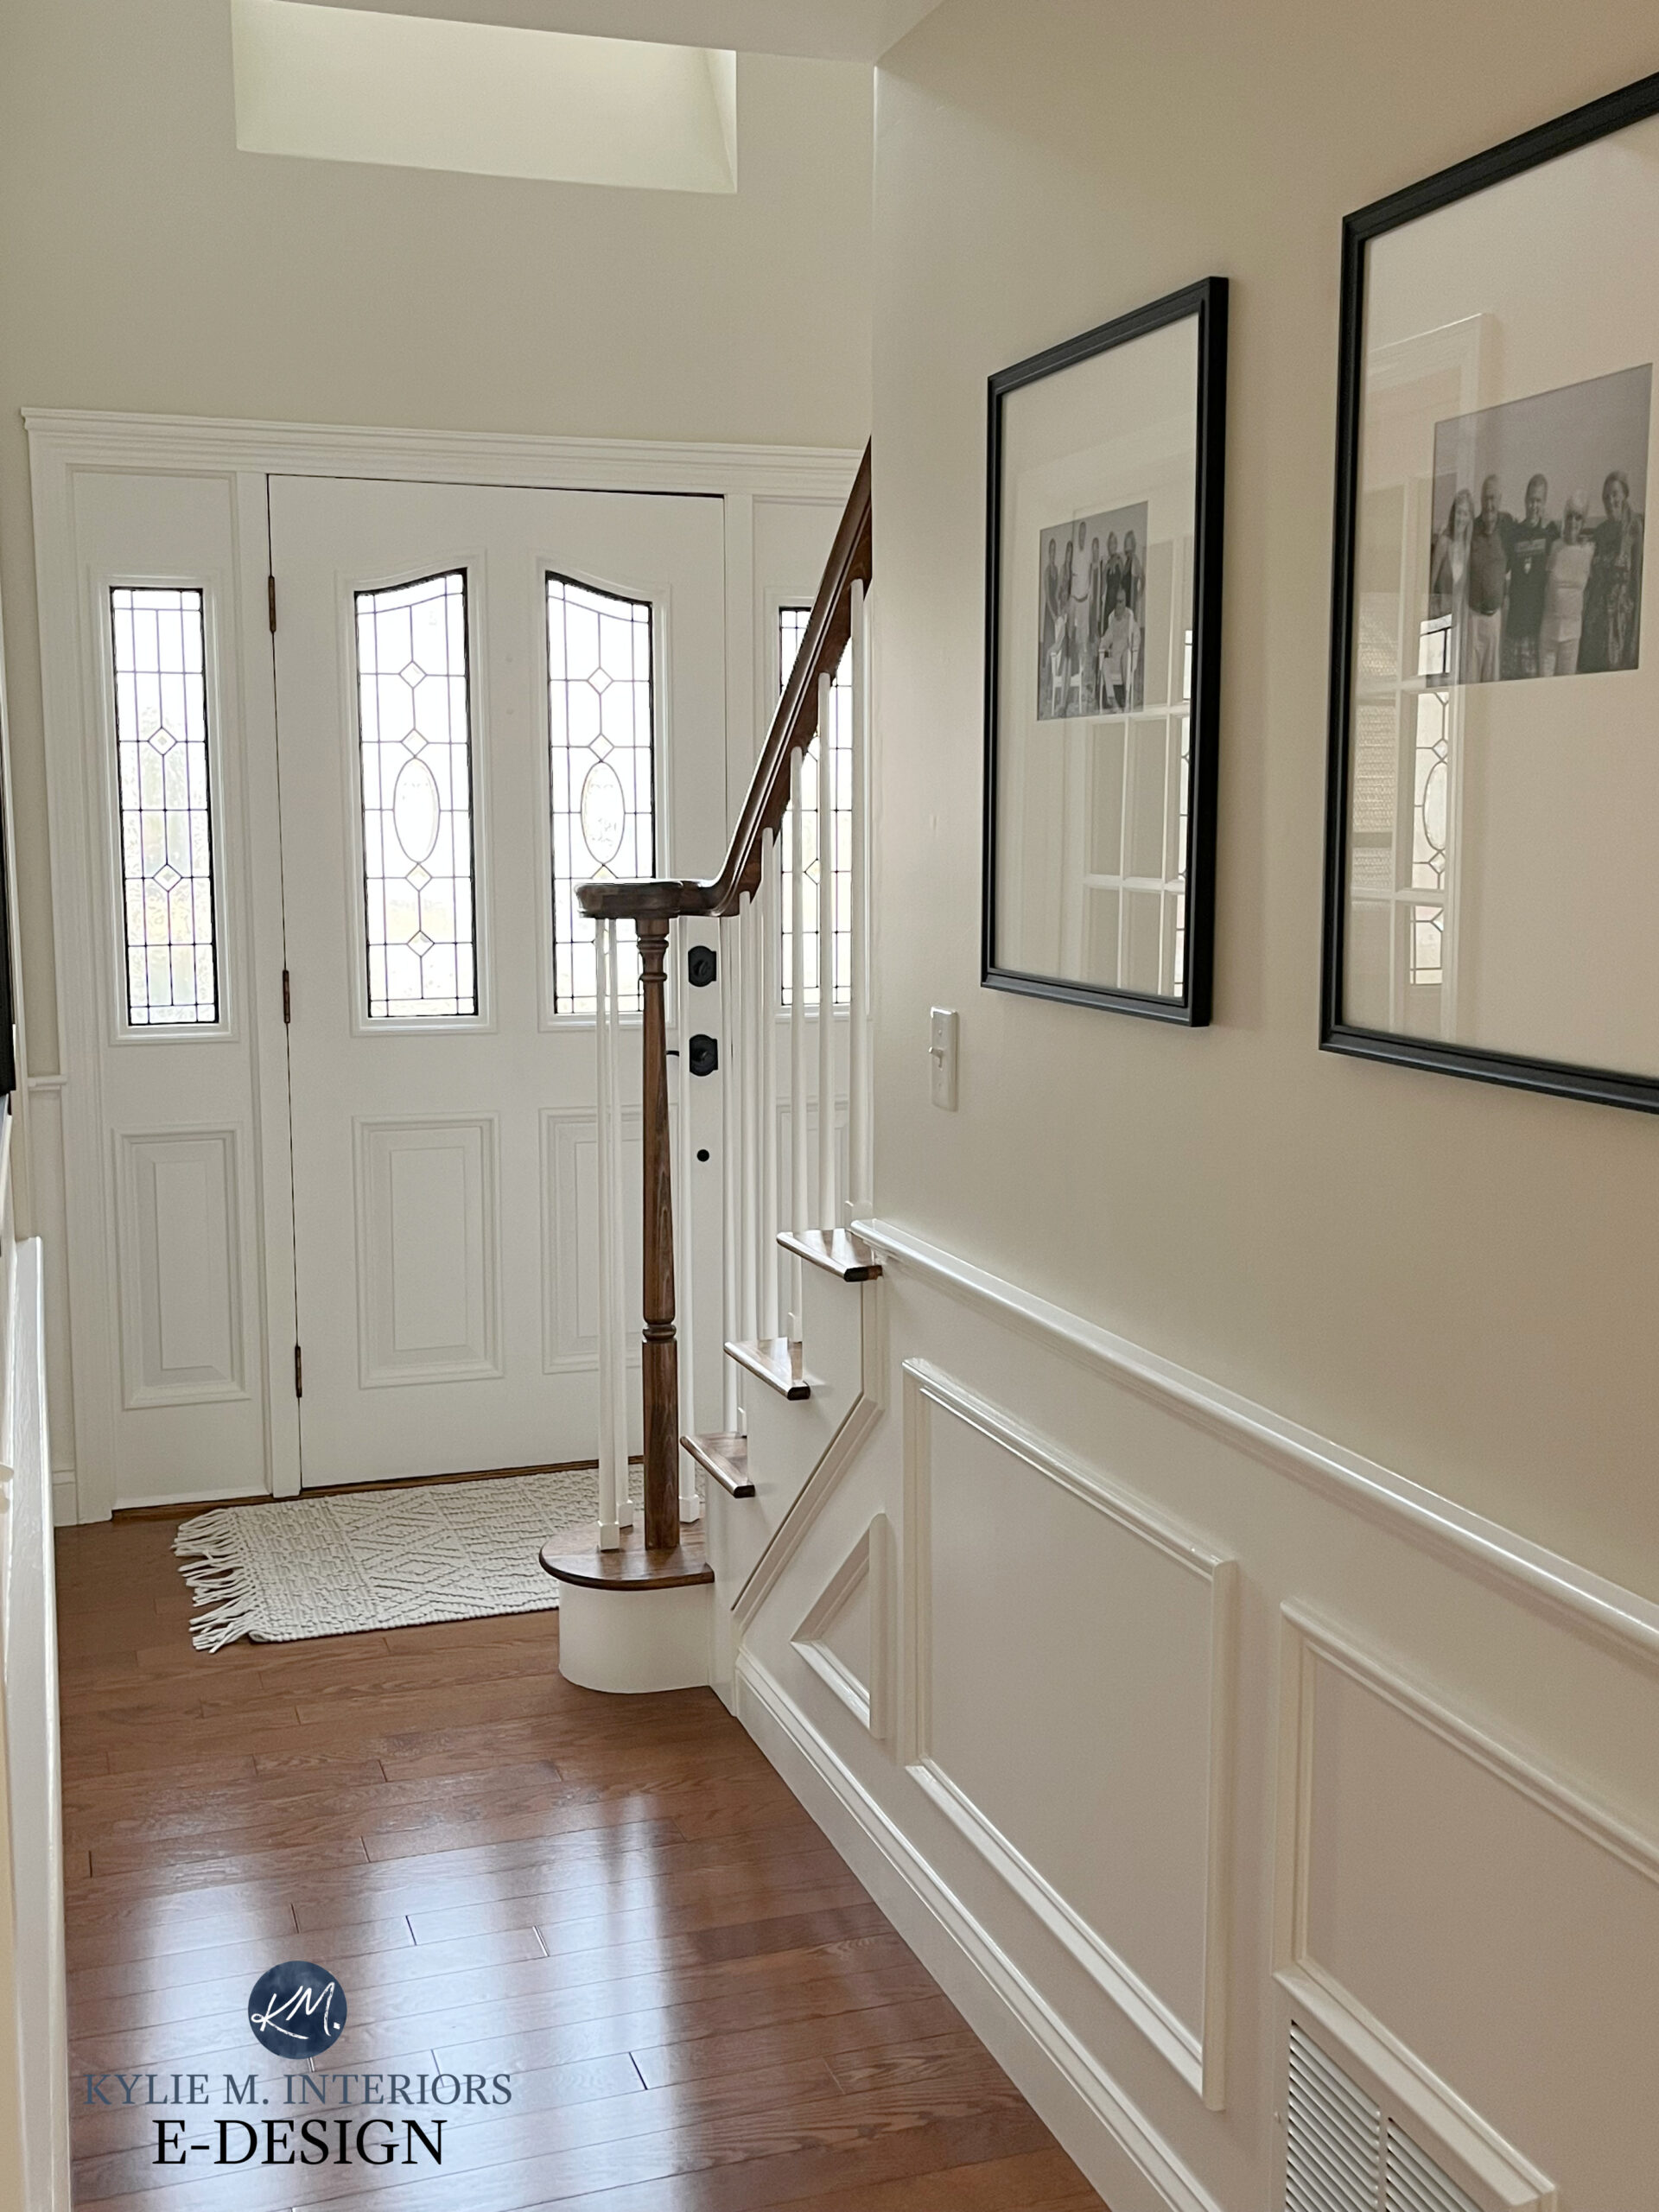 Front door in entryway, red oak stained flooring, Benjamin Moore Ballet White paint color on walls, White Dove trim.